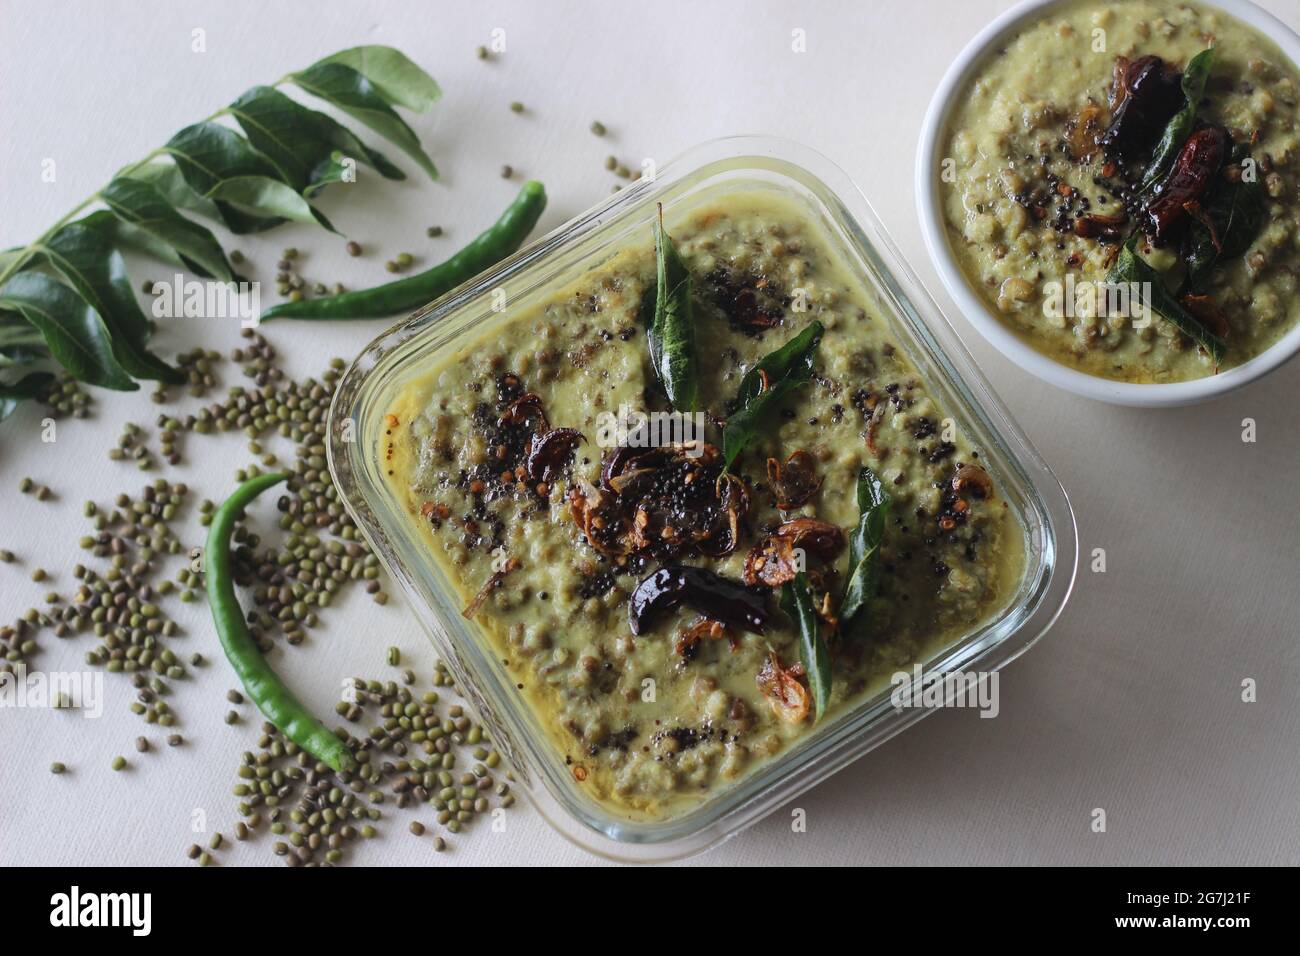 Green gram curry. Boiled green gram cooked in a paste of grated coconuts, shallots and green chilies. Popularly known as moong dal curry. Shot on whit Stock Photo